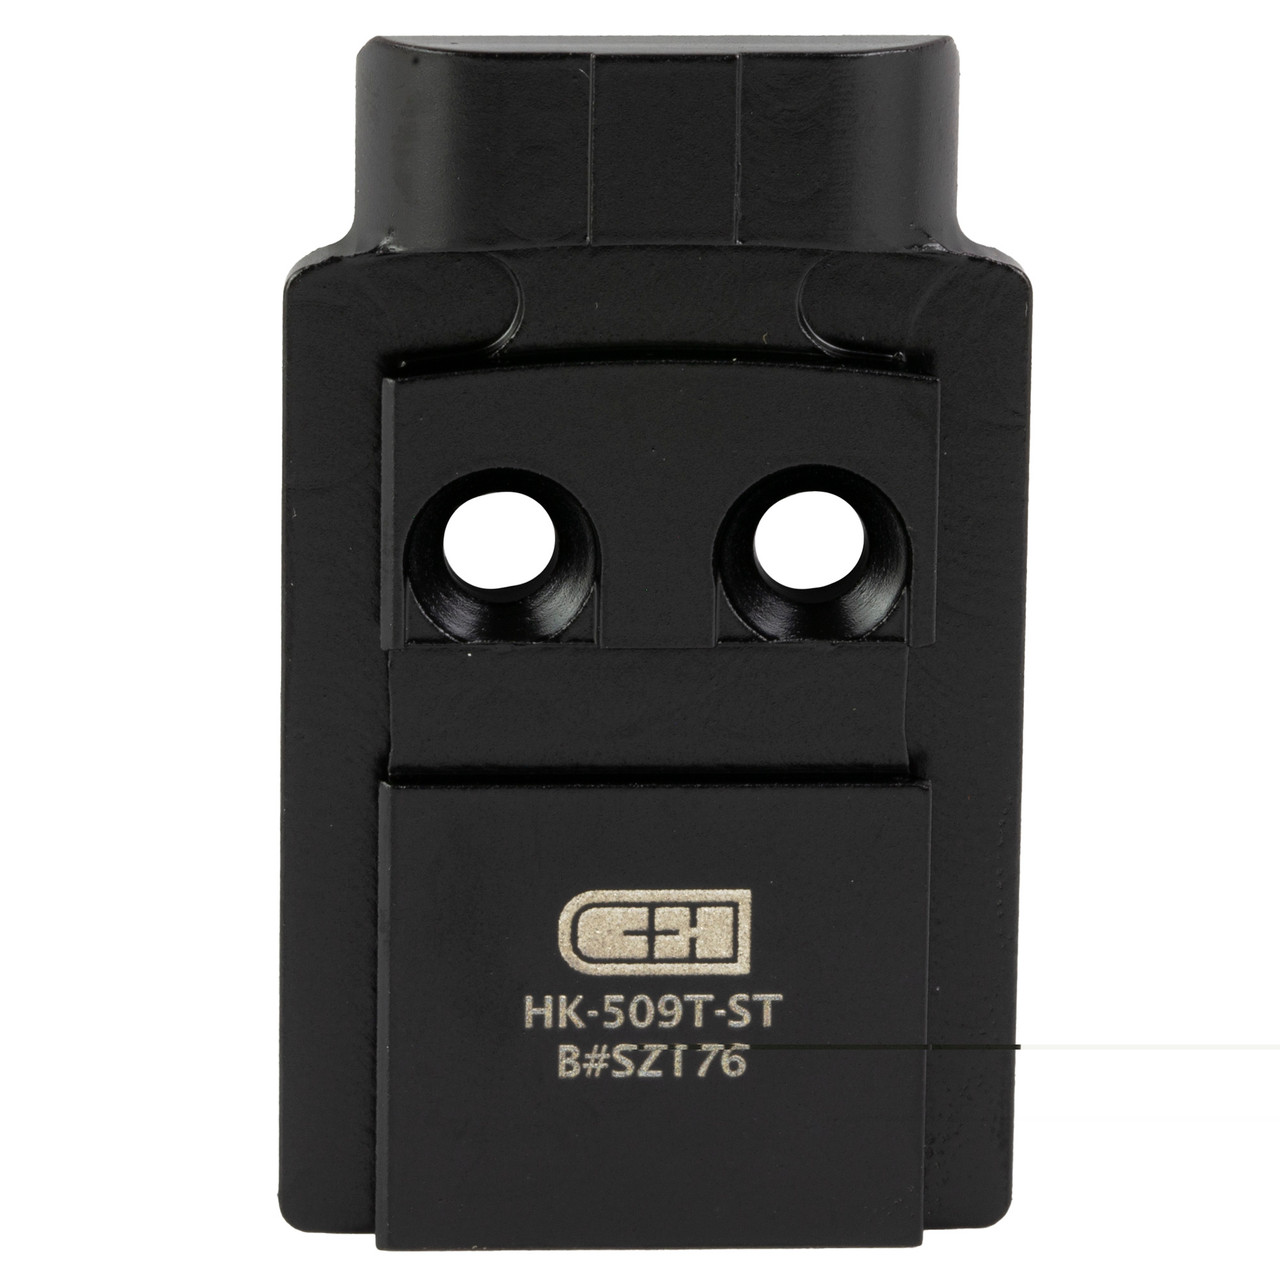 Chp Hk Vp9 Or Adapter Holoson 509t